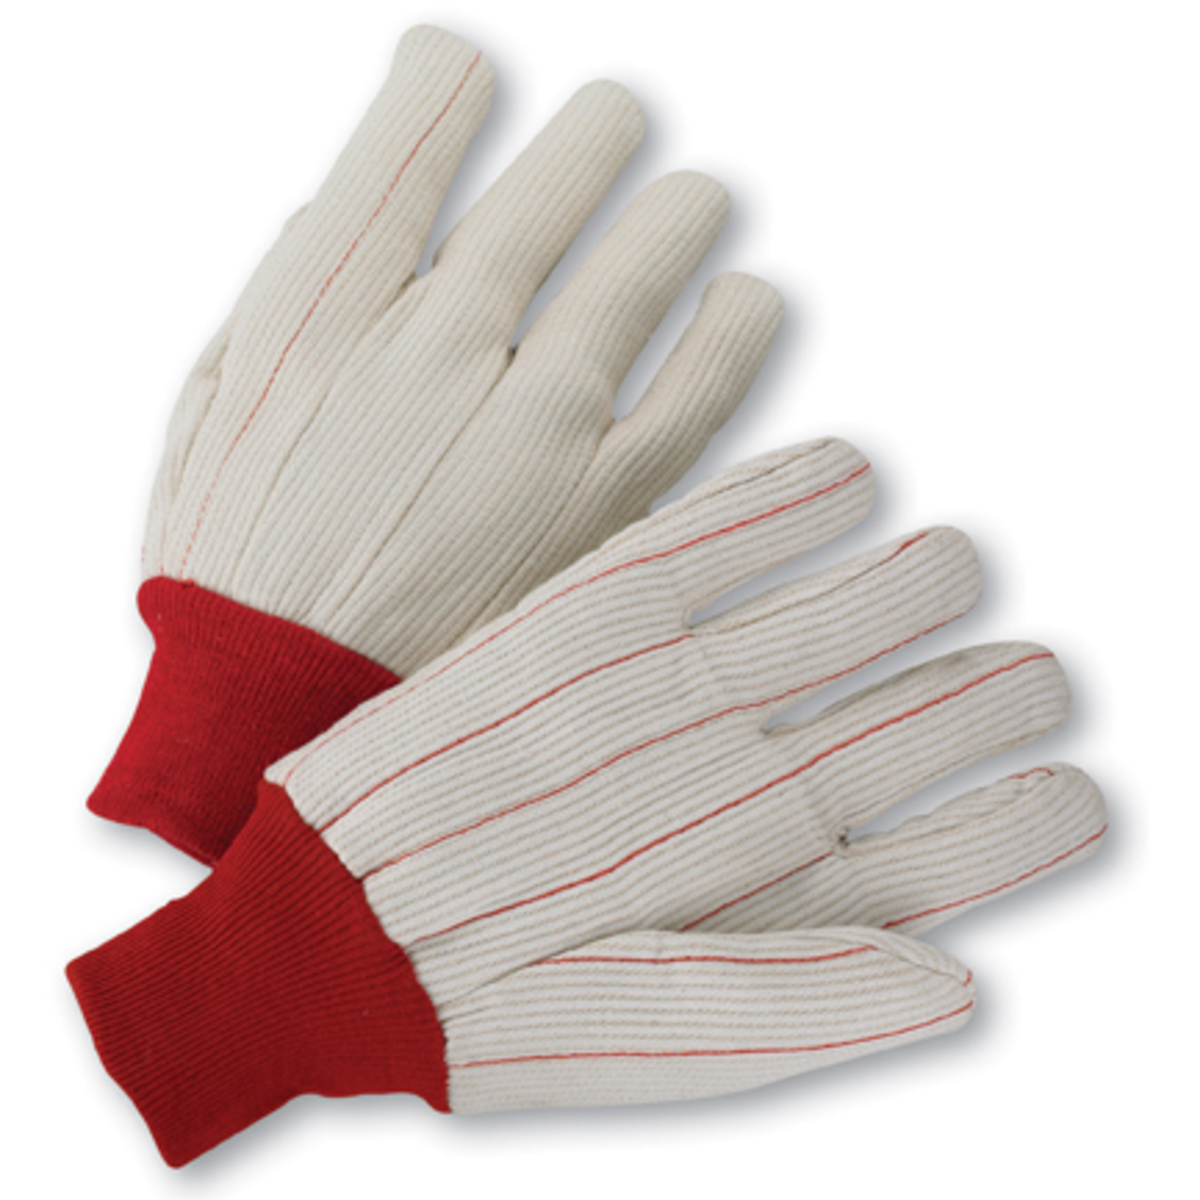 PIP® Large Natural Medium Weight Polyester/Cotton Blend Hot Mill Gloves With Knit Wrist